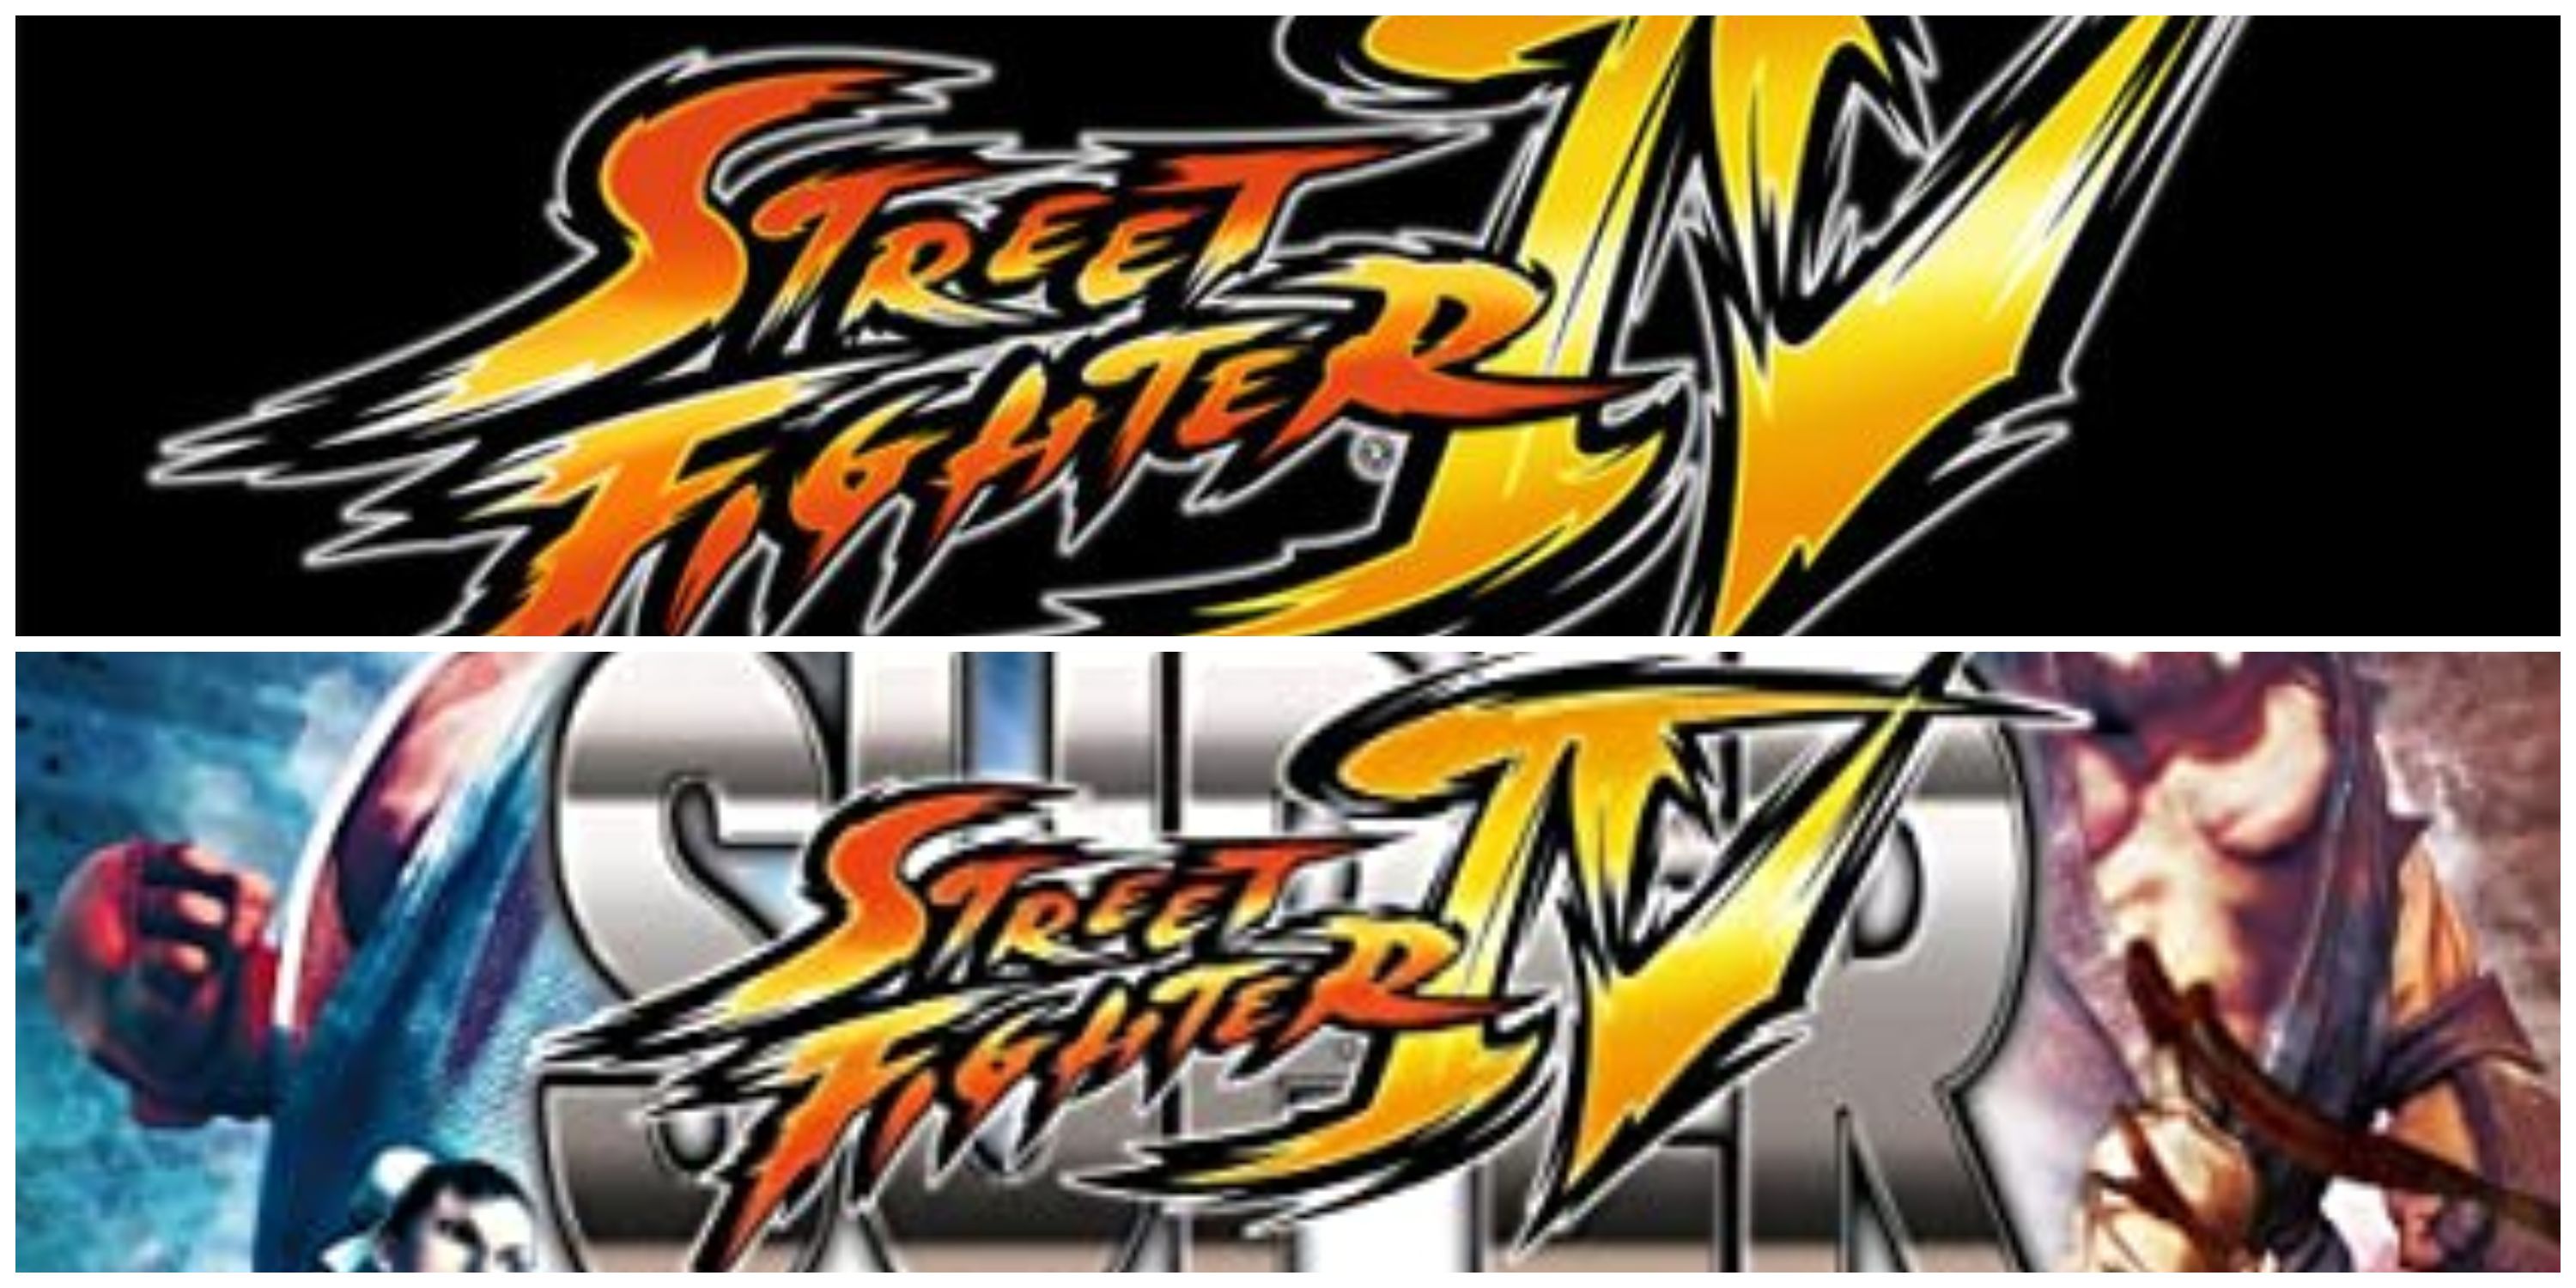 Street Fighter 4 And Super Street Fighter 4 Title cards